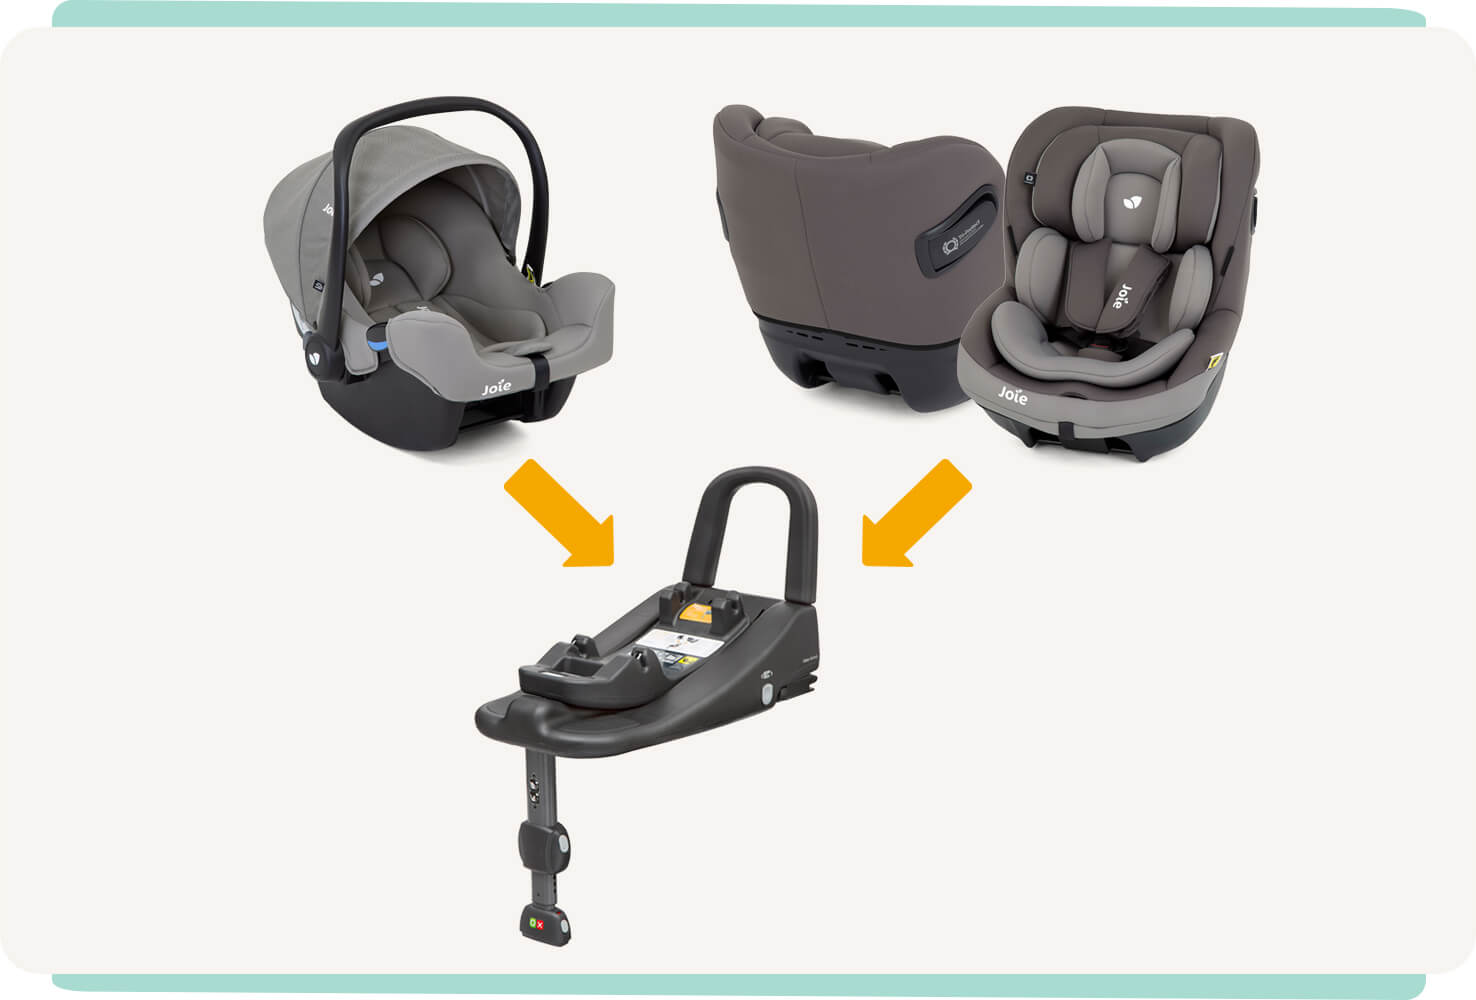  Joie I-Snug infant car seat and I-Venture toddler seat positioned above the I-Base Advance car seat base, with orange arrows pointing down to the base.